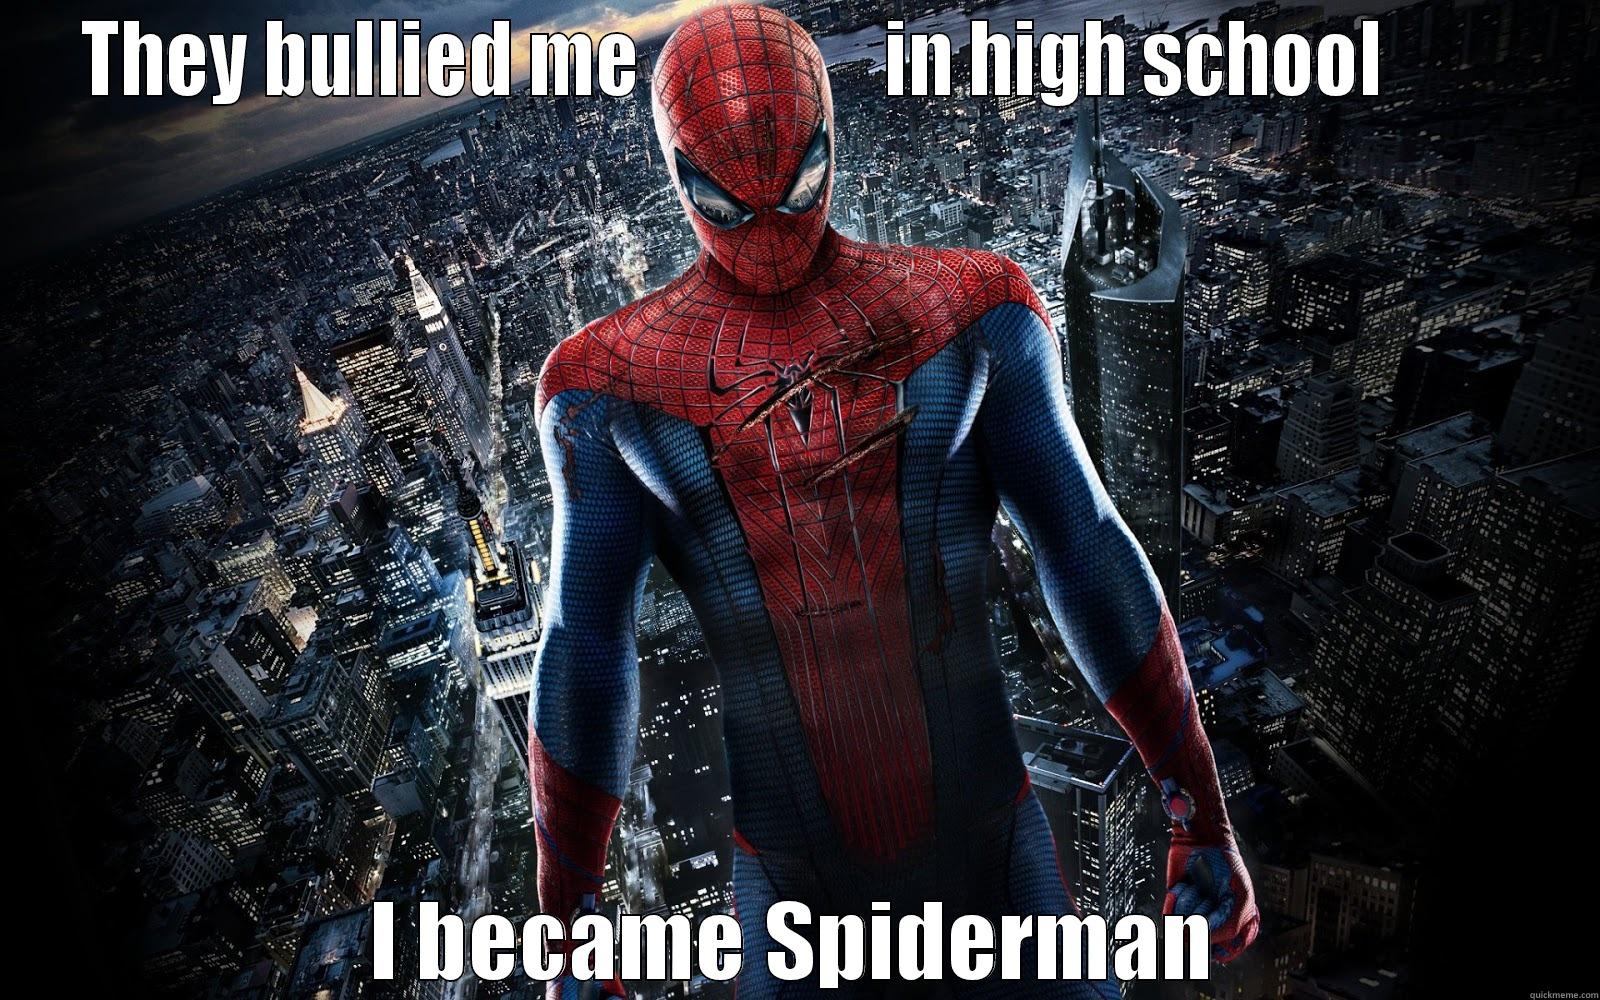 THEY BULLIED ME                IN HIGH SCHOOL         I BECAME SPIDERMAN Misc